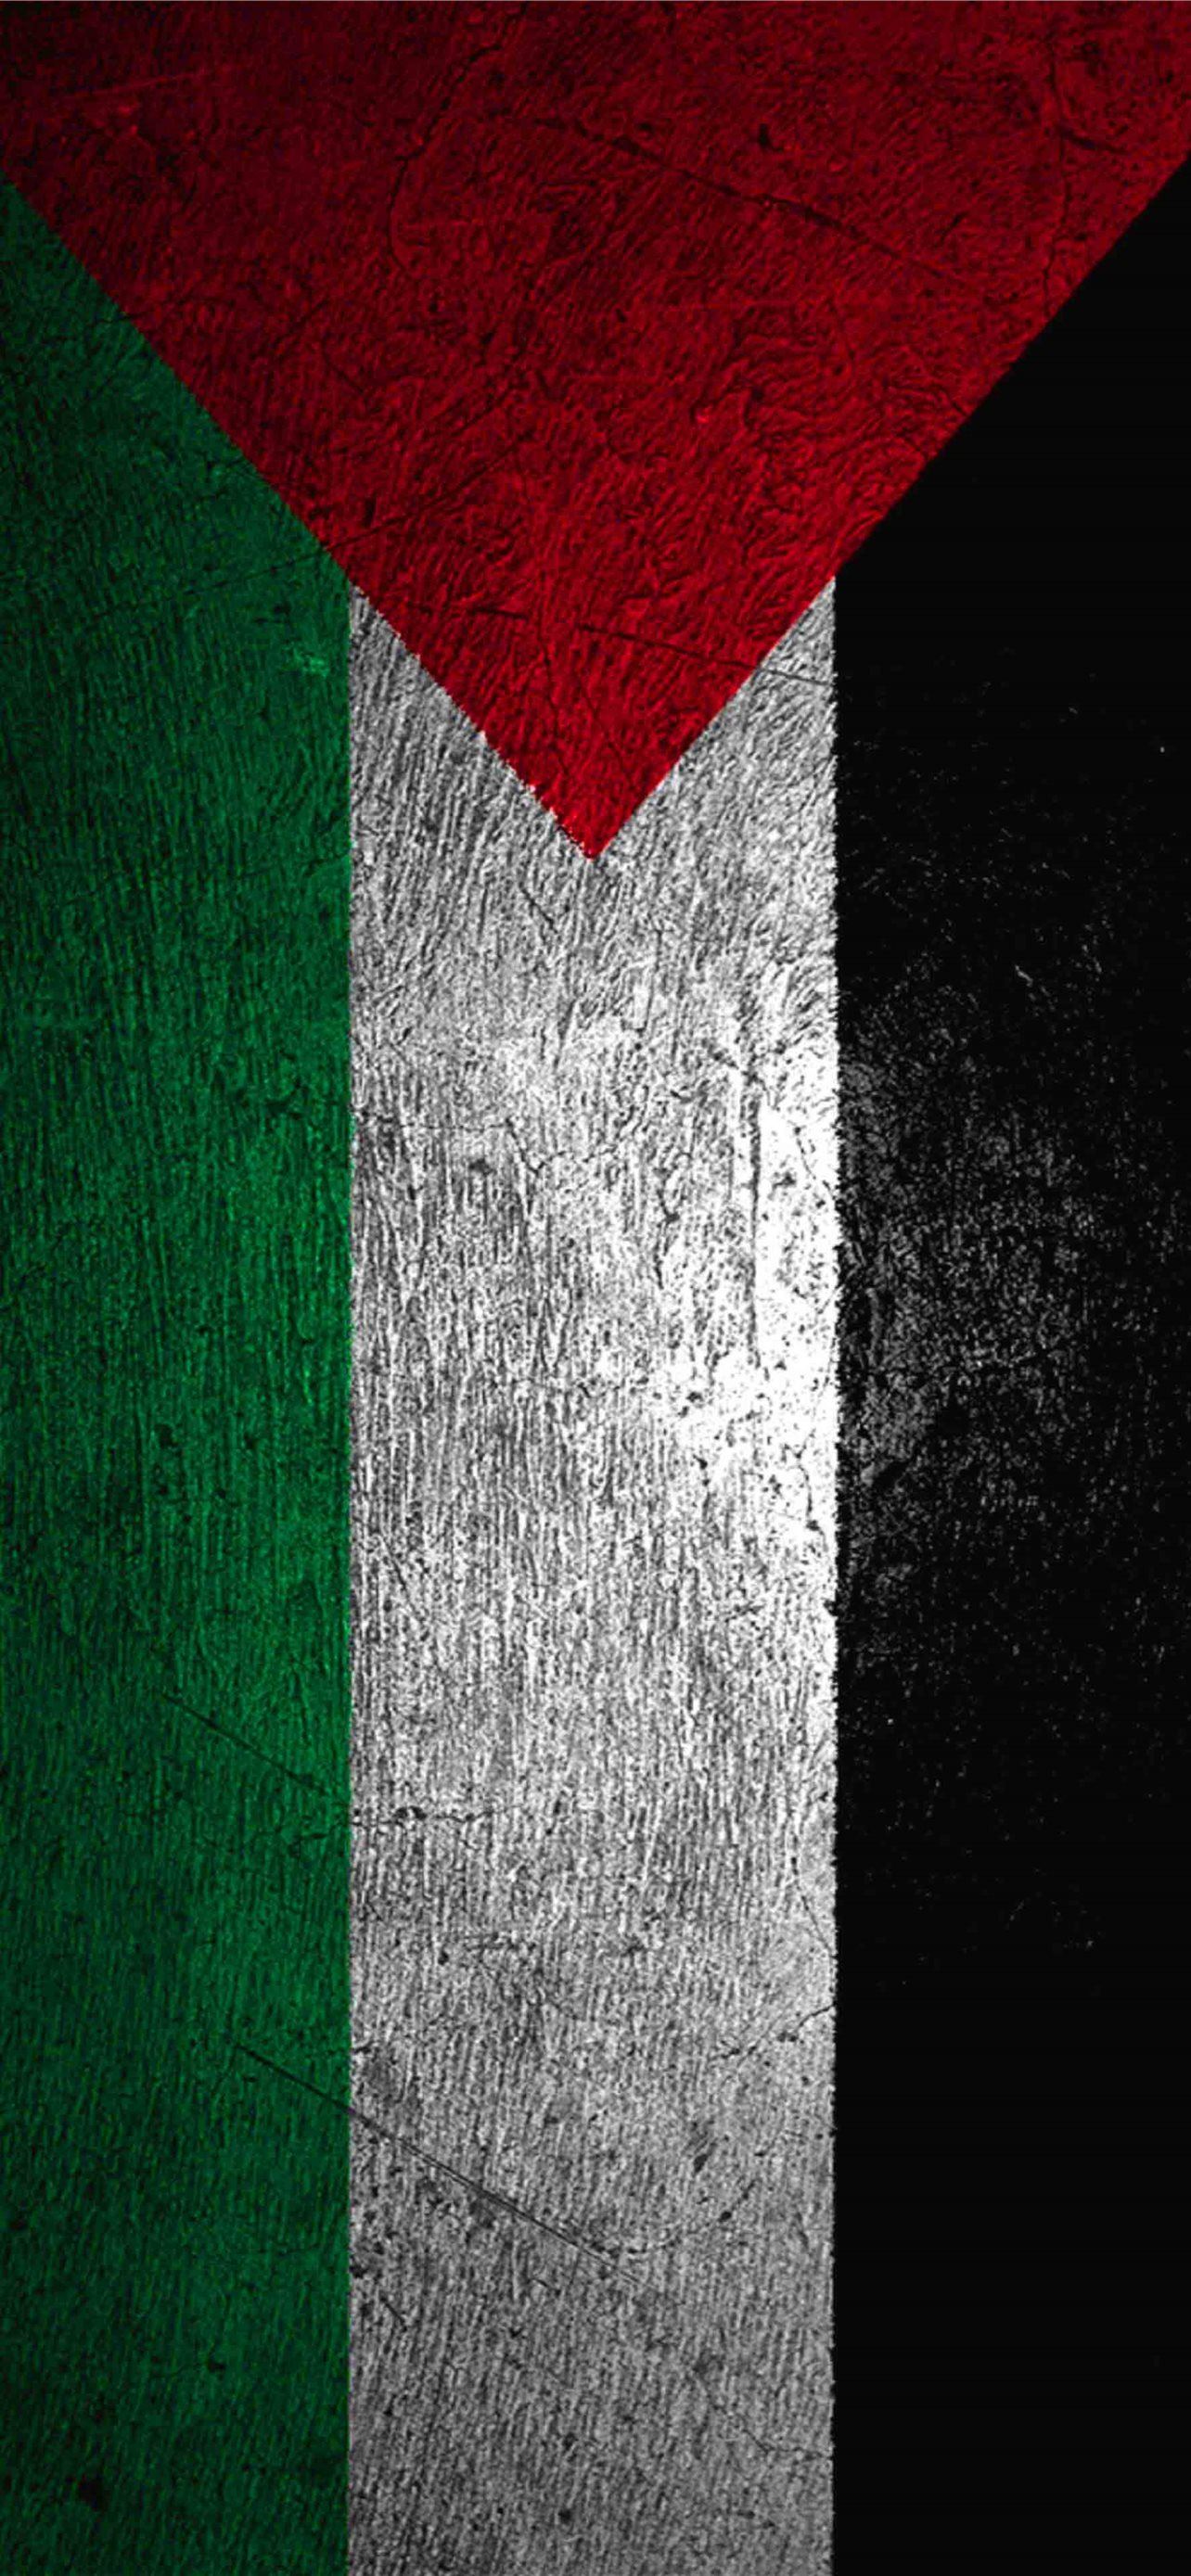 Palestine iphone wallpapers free download